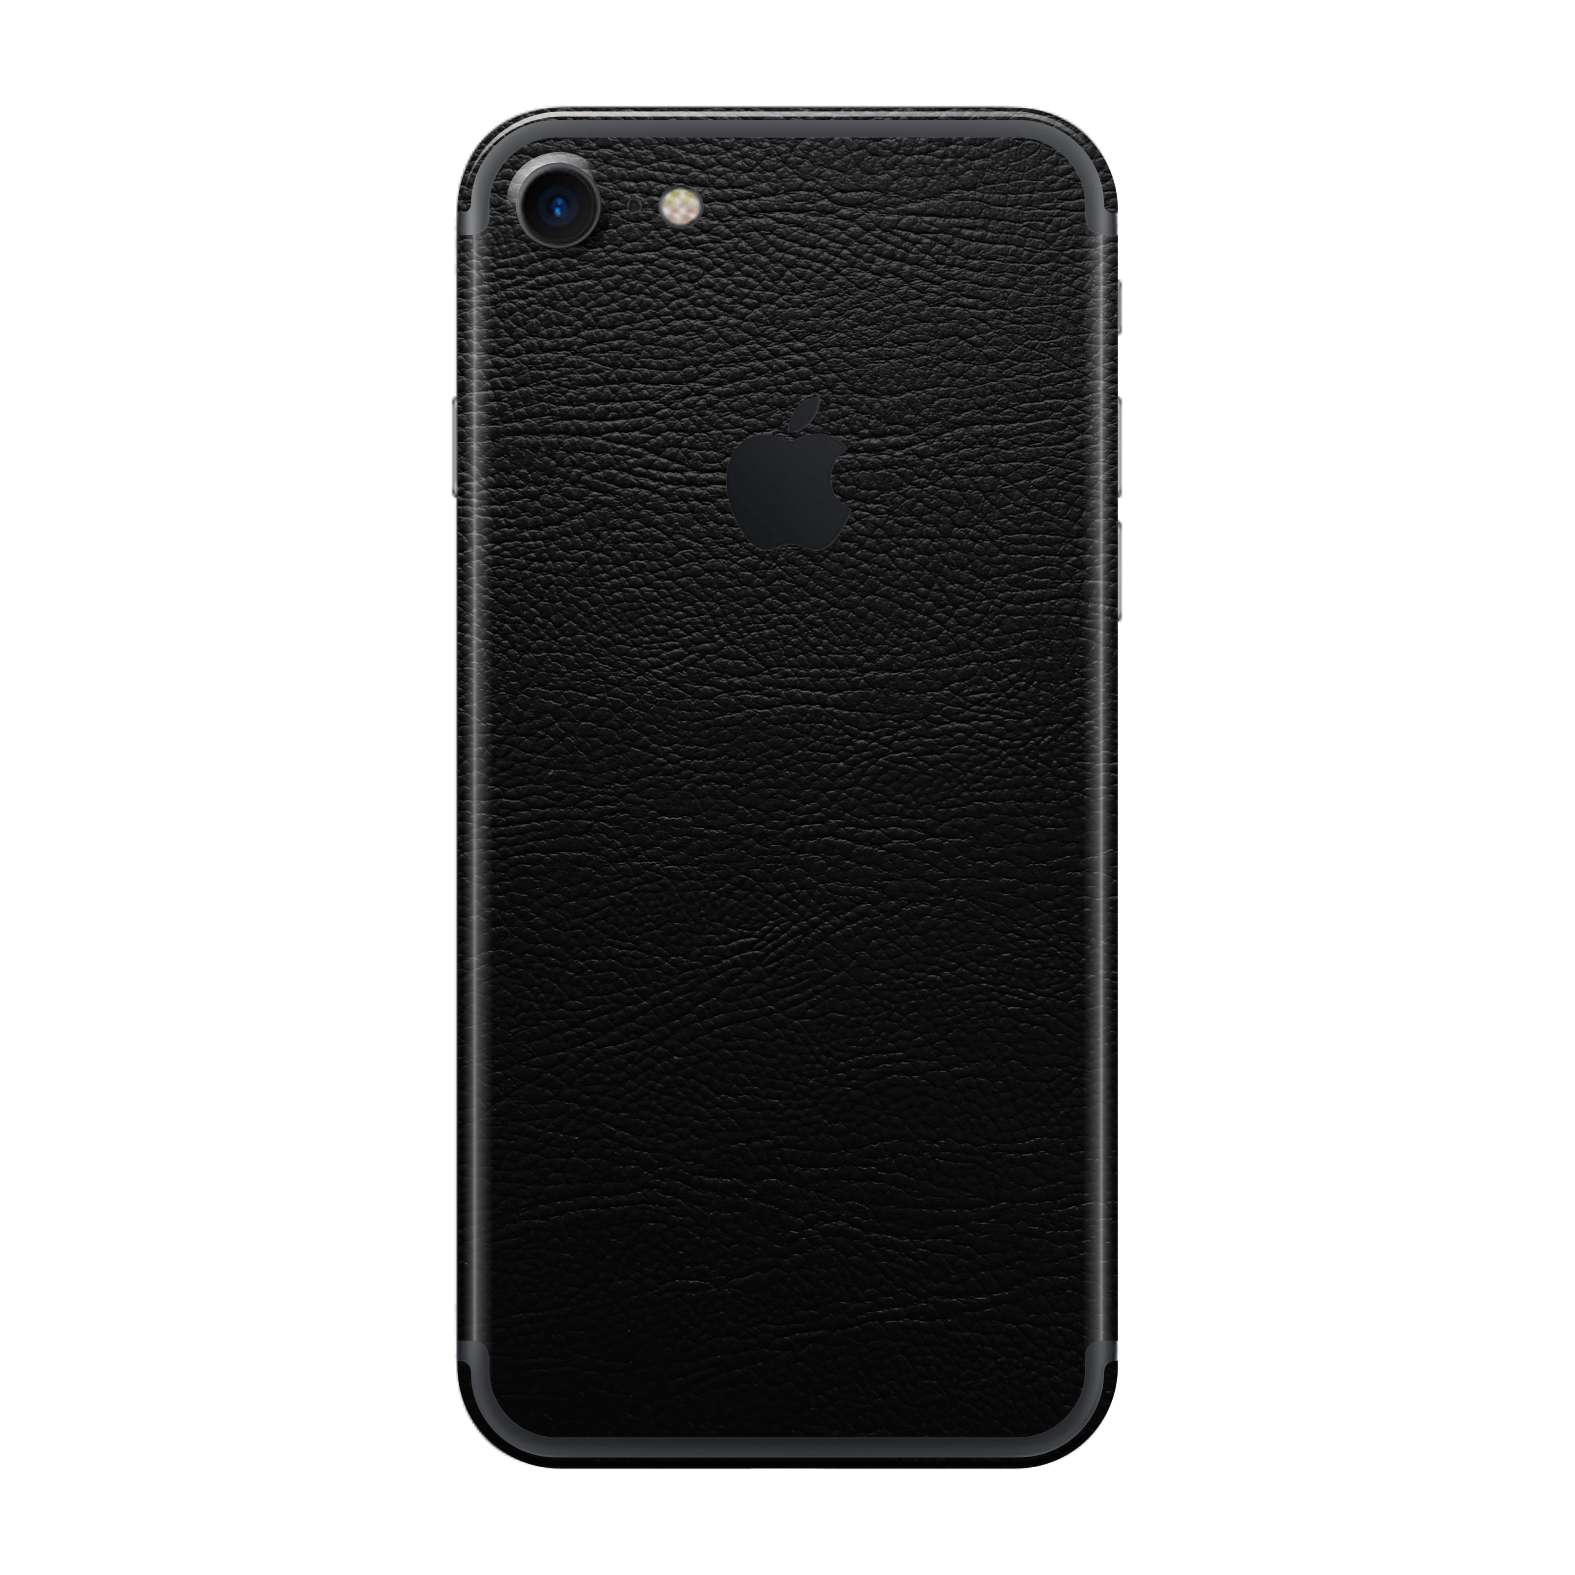 iPhone 7 Luxuria BLACK LEATHER Riders Skin Wrap Sticker Decal Cover Protector by EasySkinz | EasySkinz.com